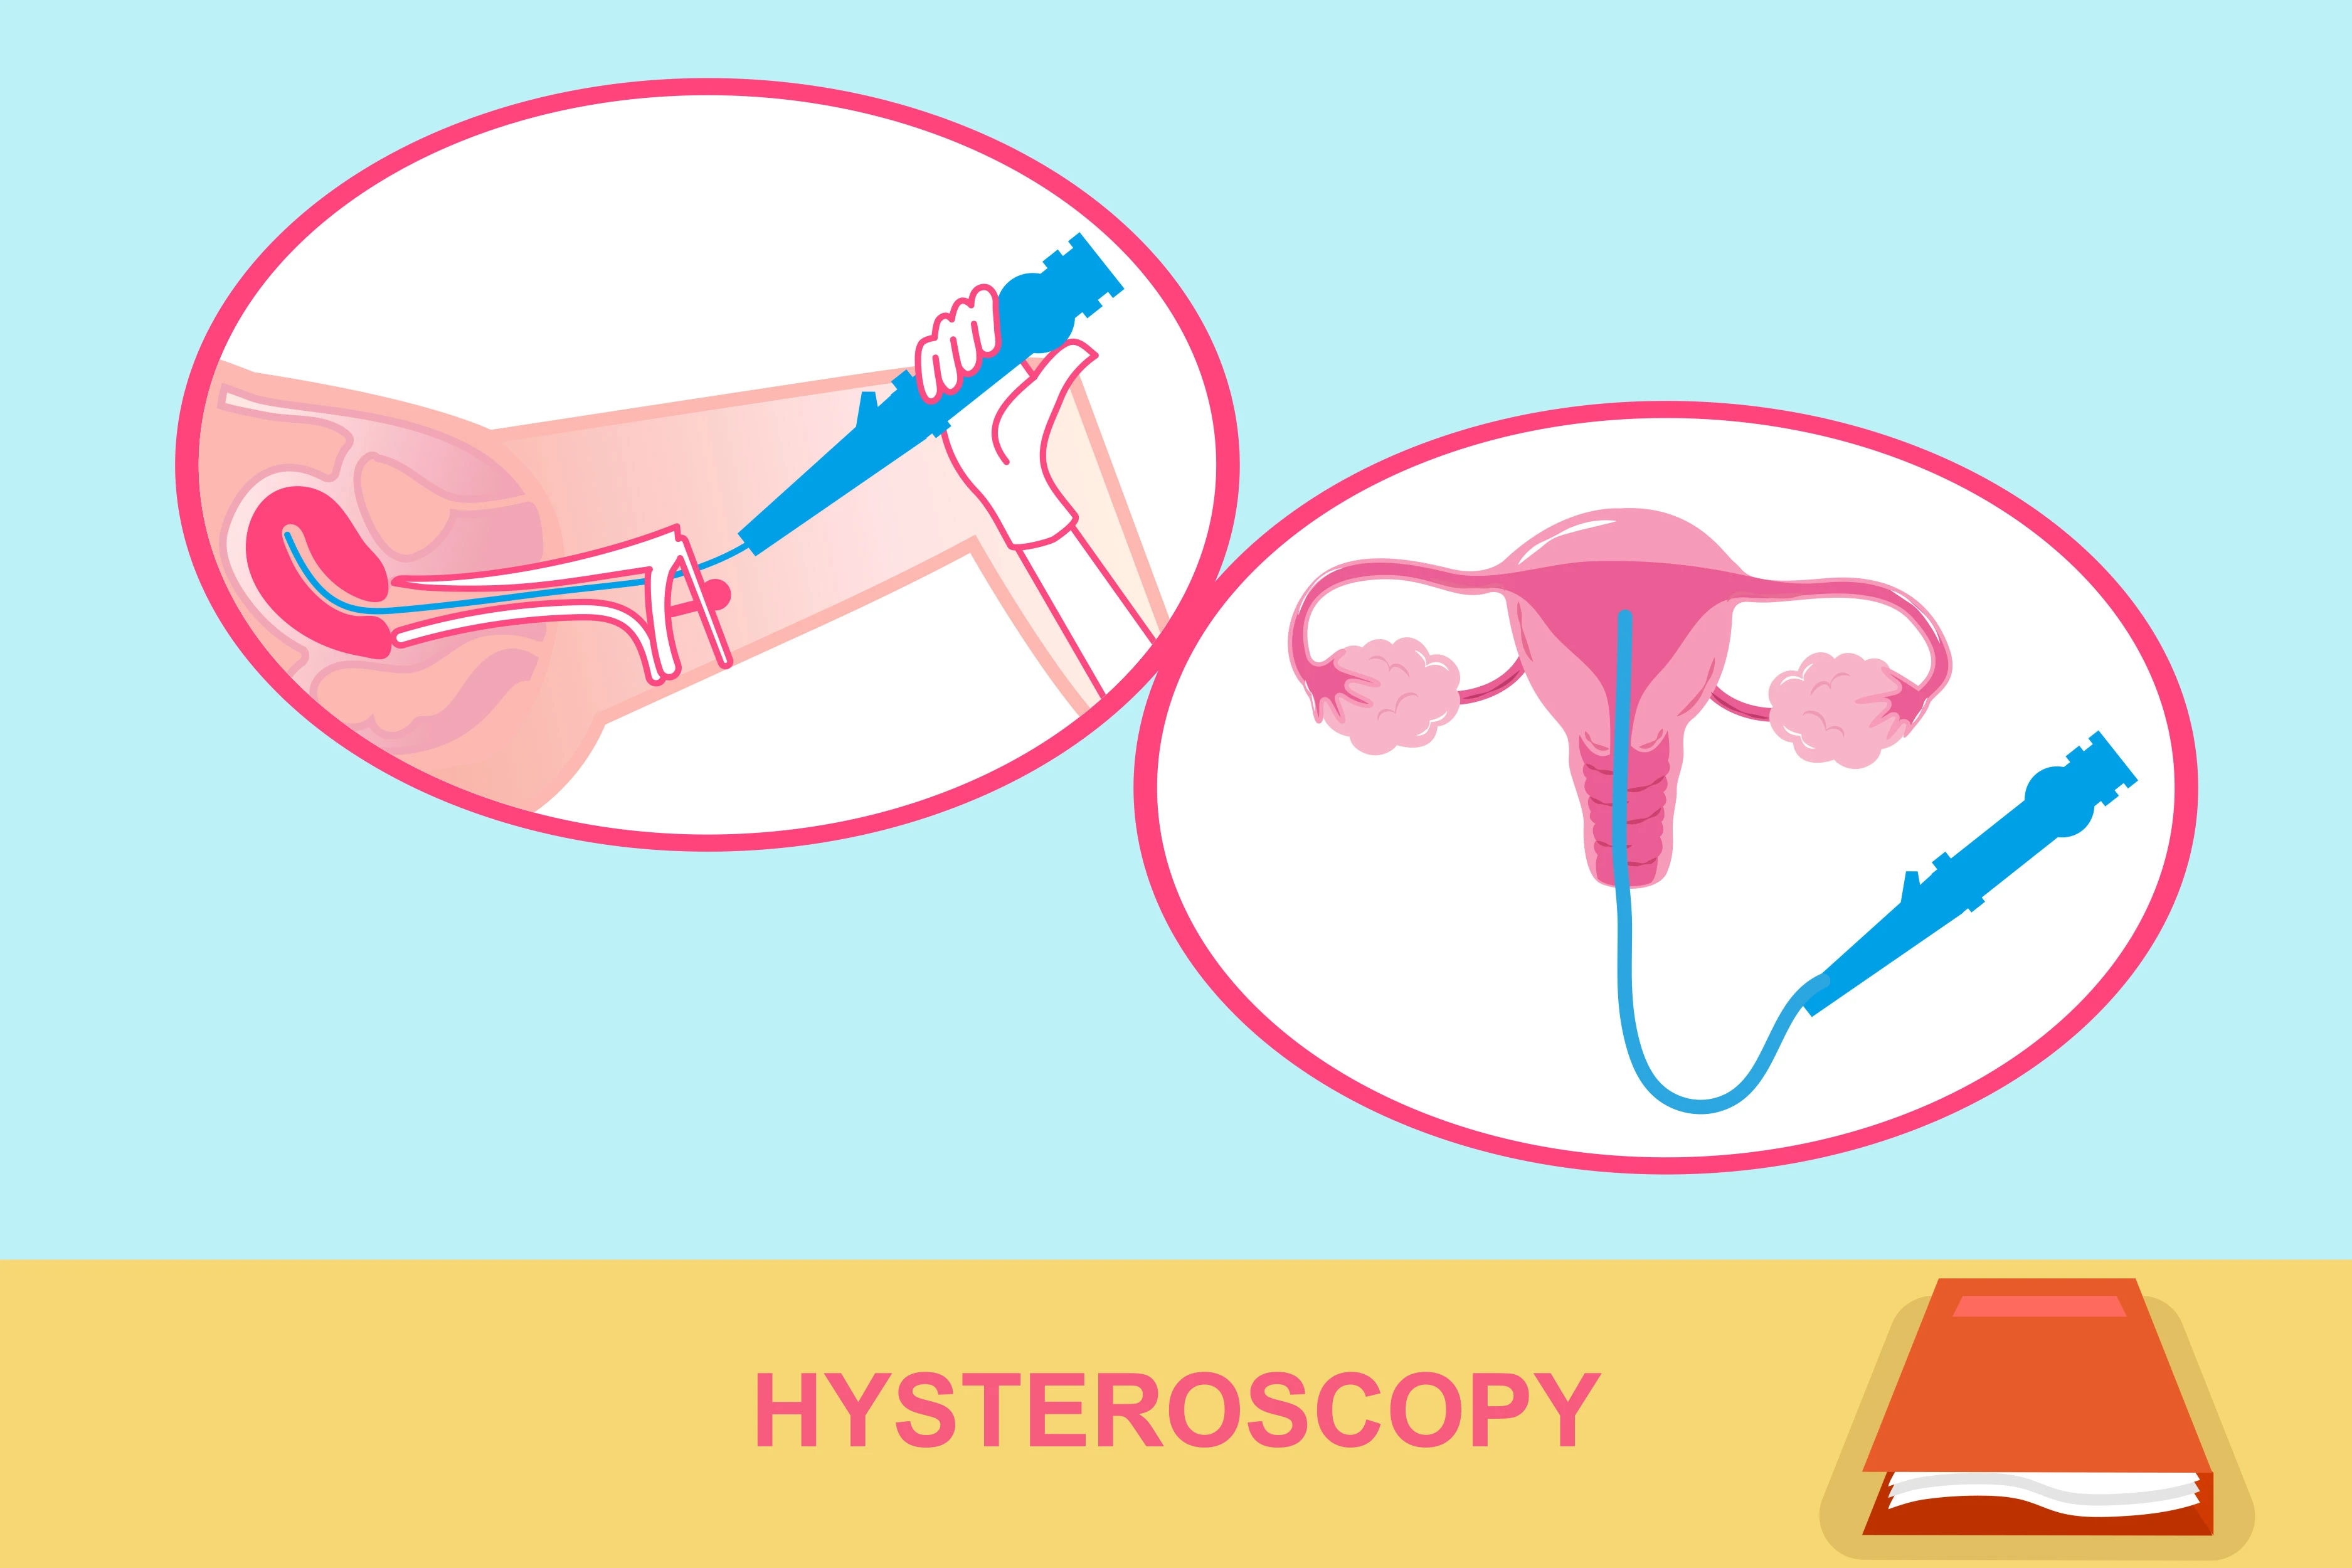 diagram showing hysteroscopy procedure which involves insertion of a small thin, lighted tube through the vagina and cervix into uterus